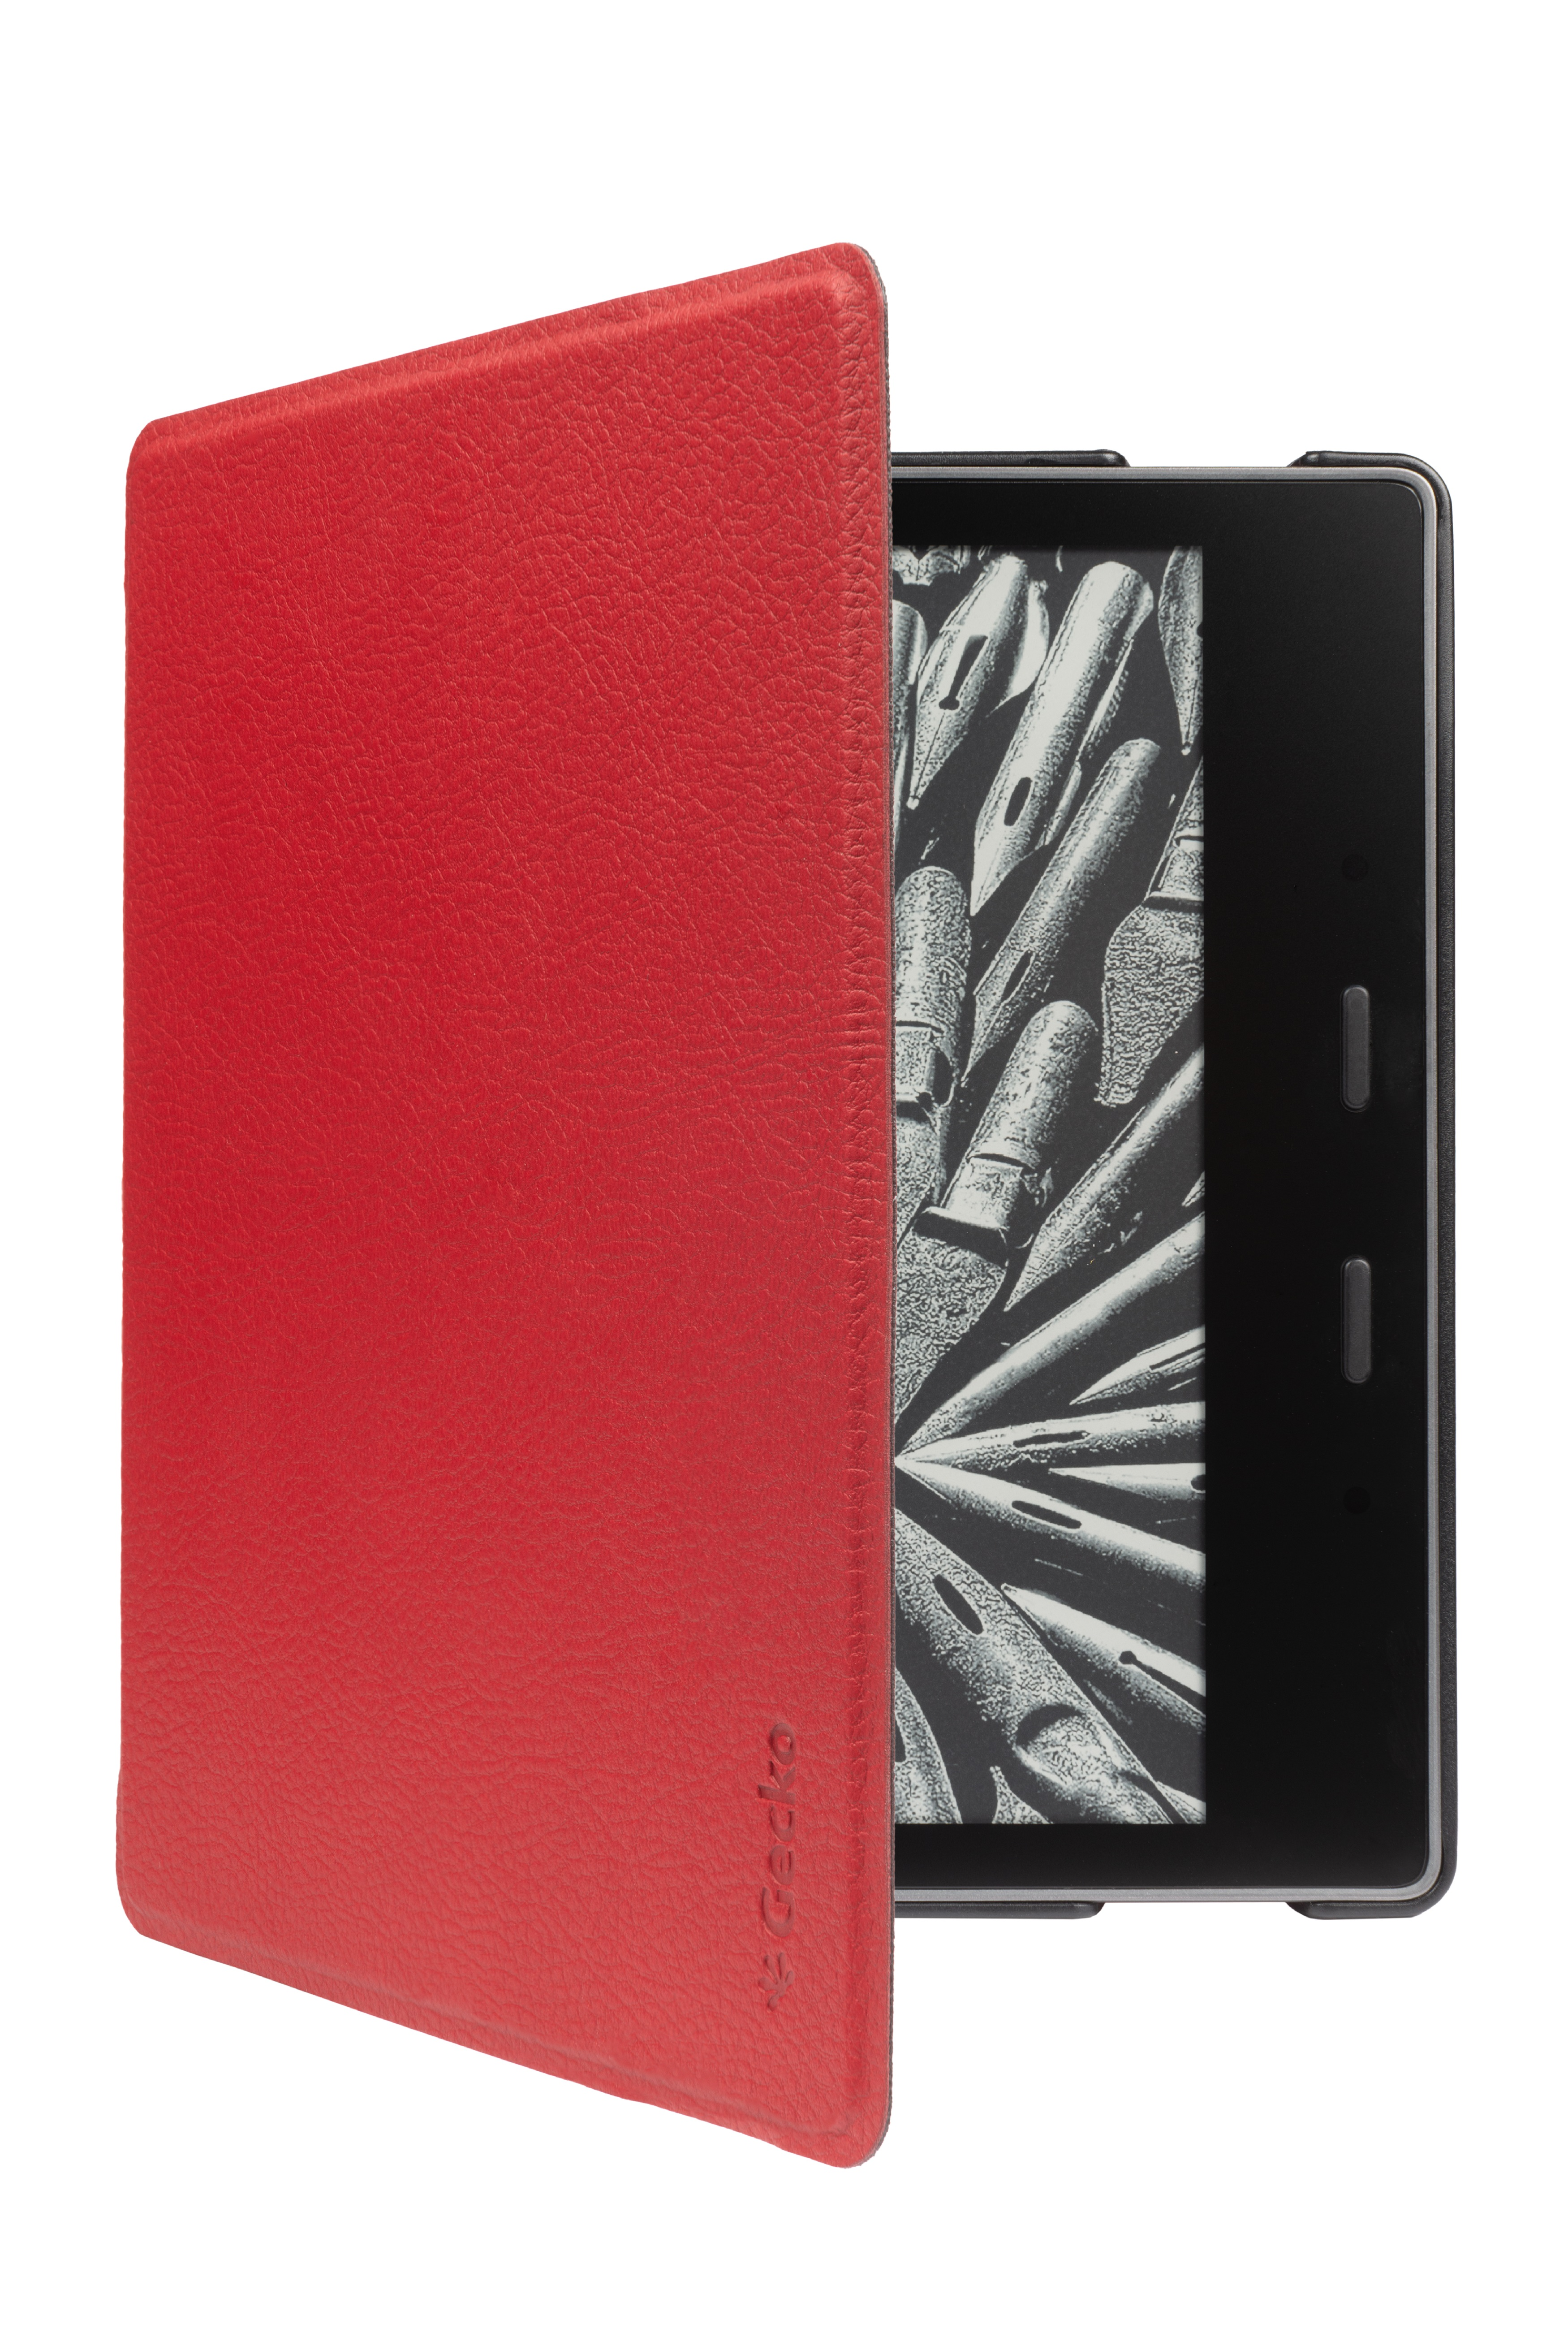 GECKO COVERS Rot Leather, Hülle E-Book für Kindle Amazon Bookcover Cover Slimfit Reader PU